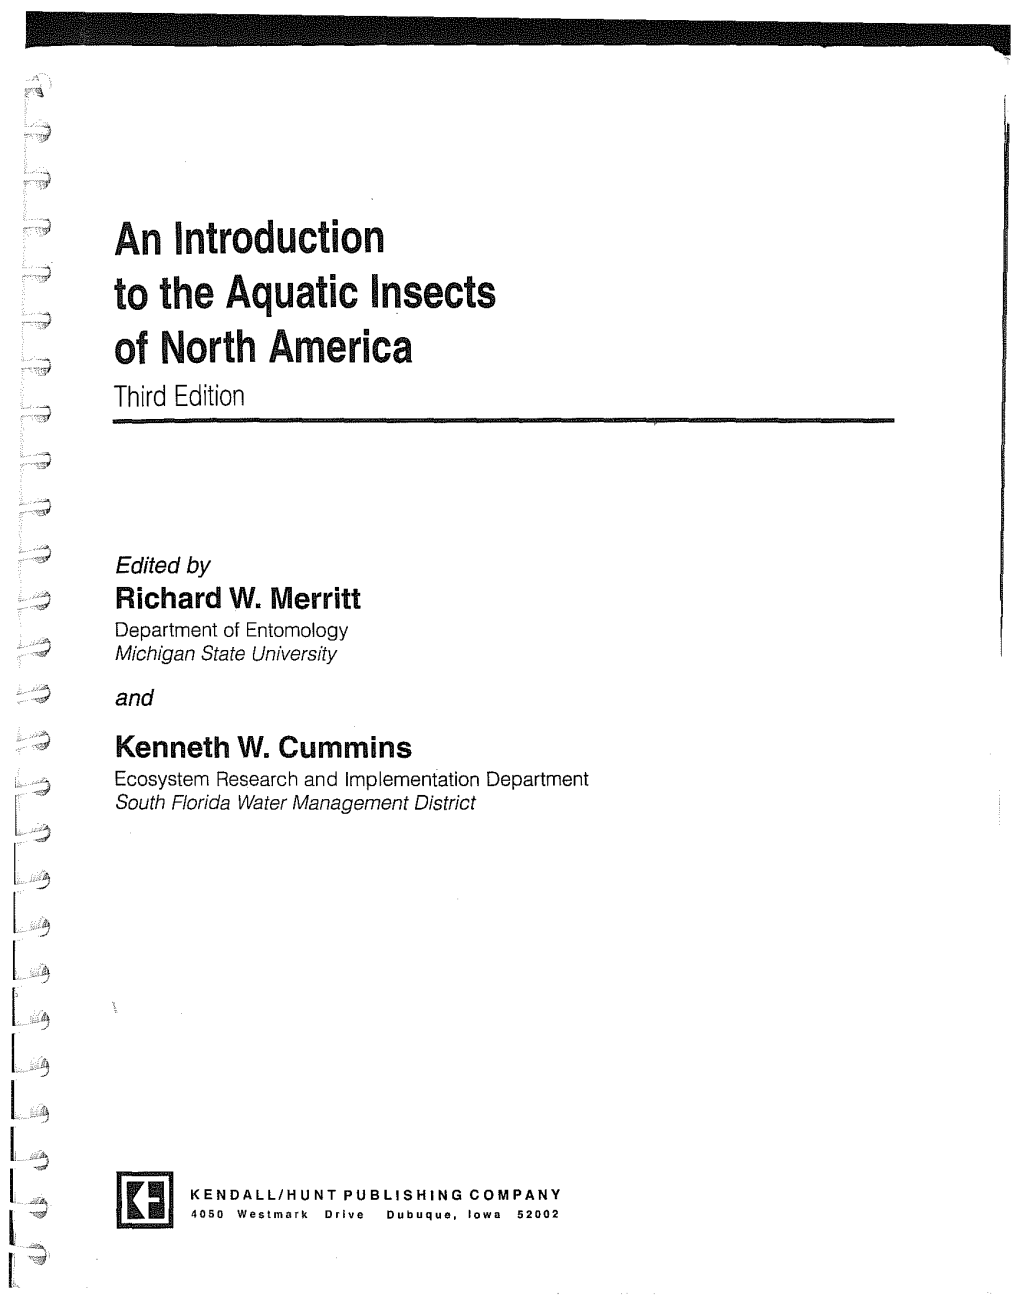 An Introduction to the Aquatic Insects of North America Third Edition